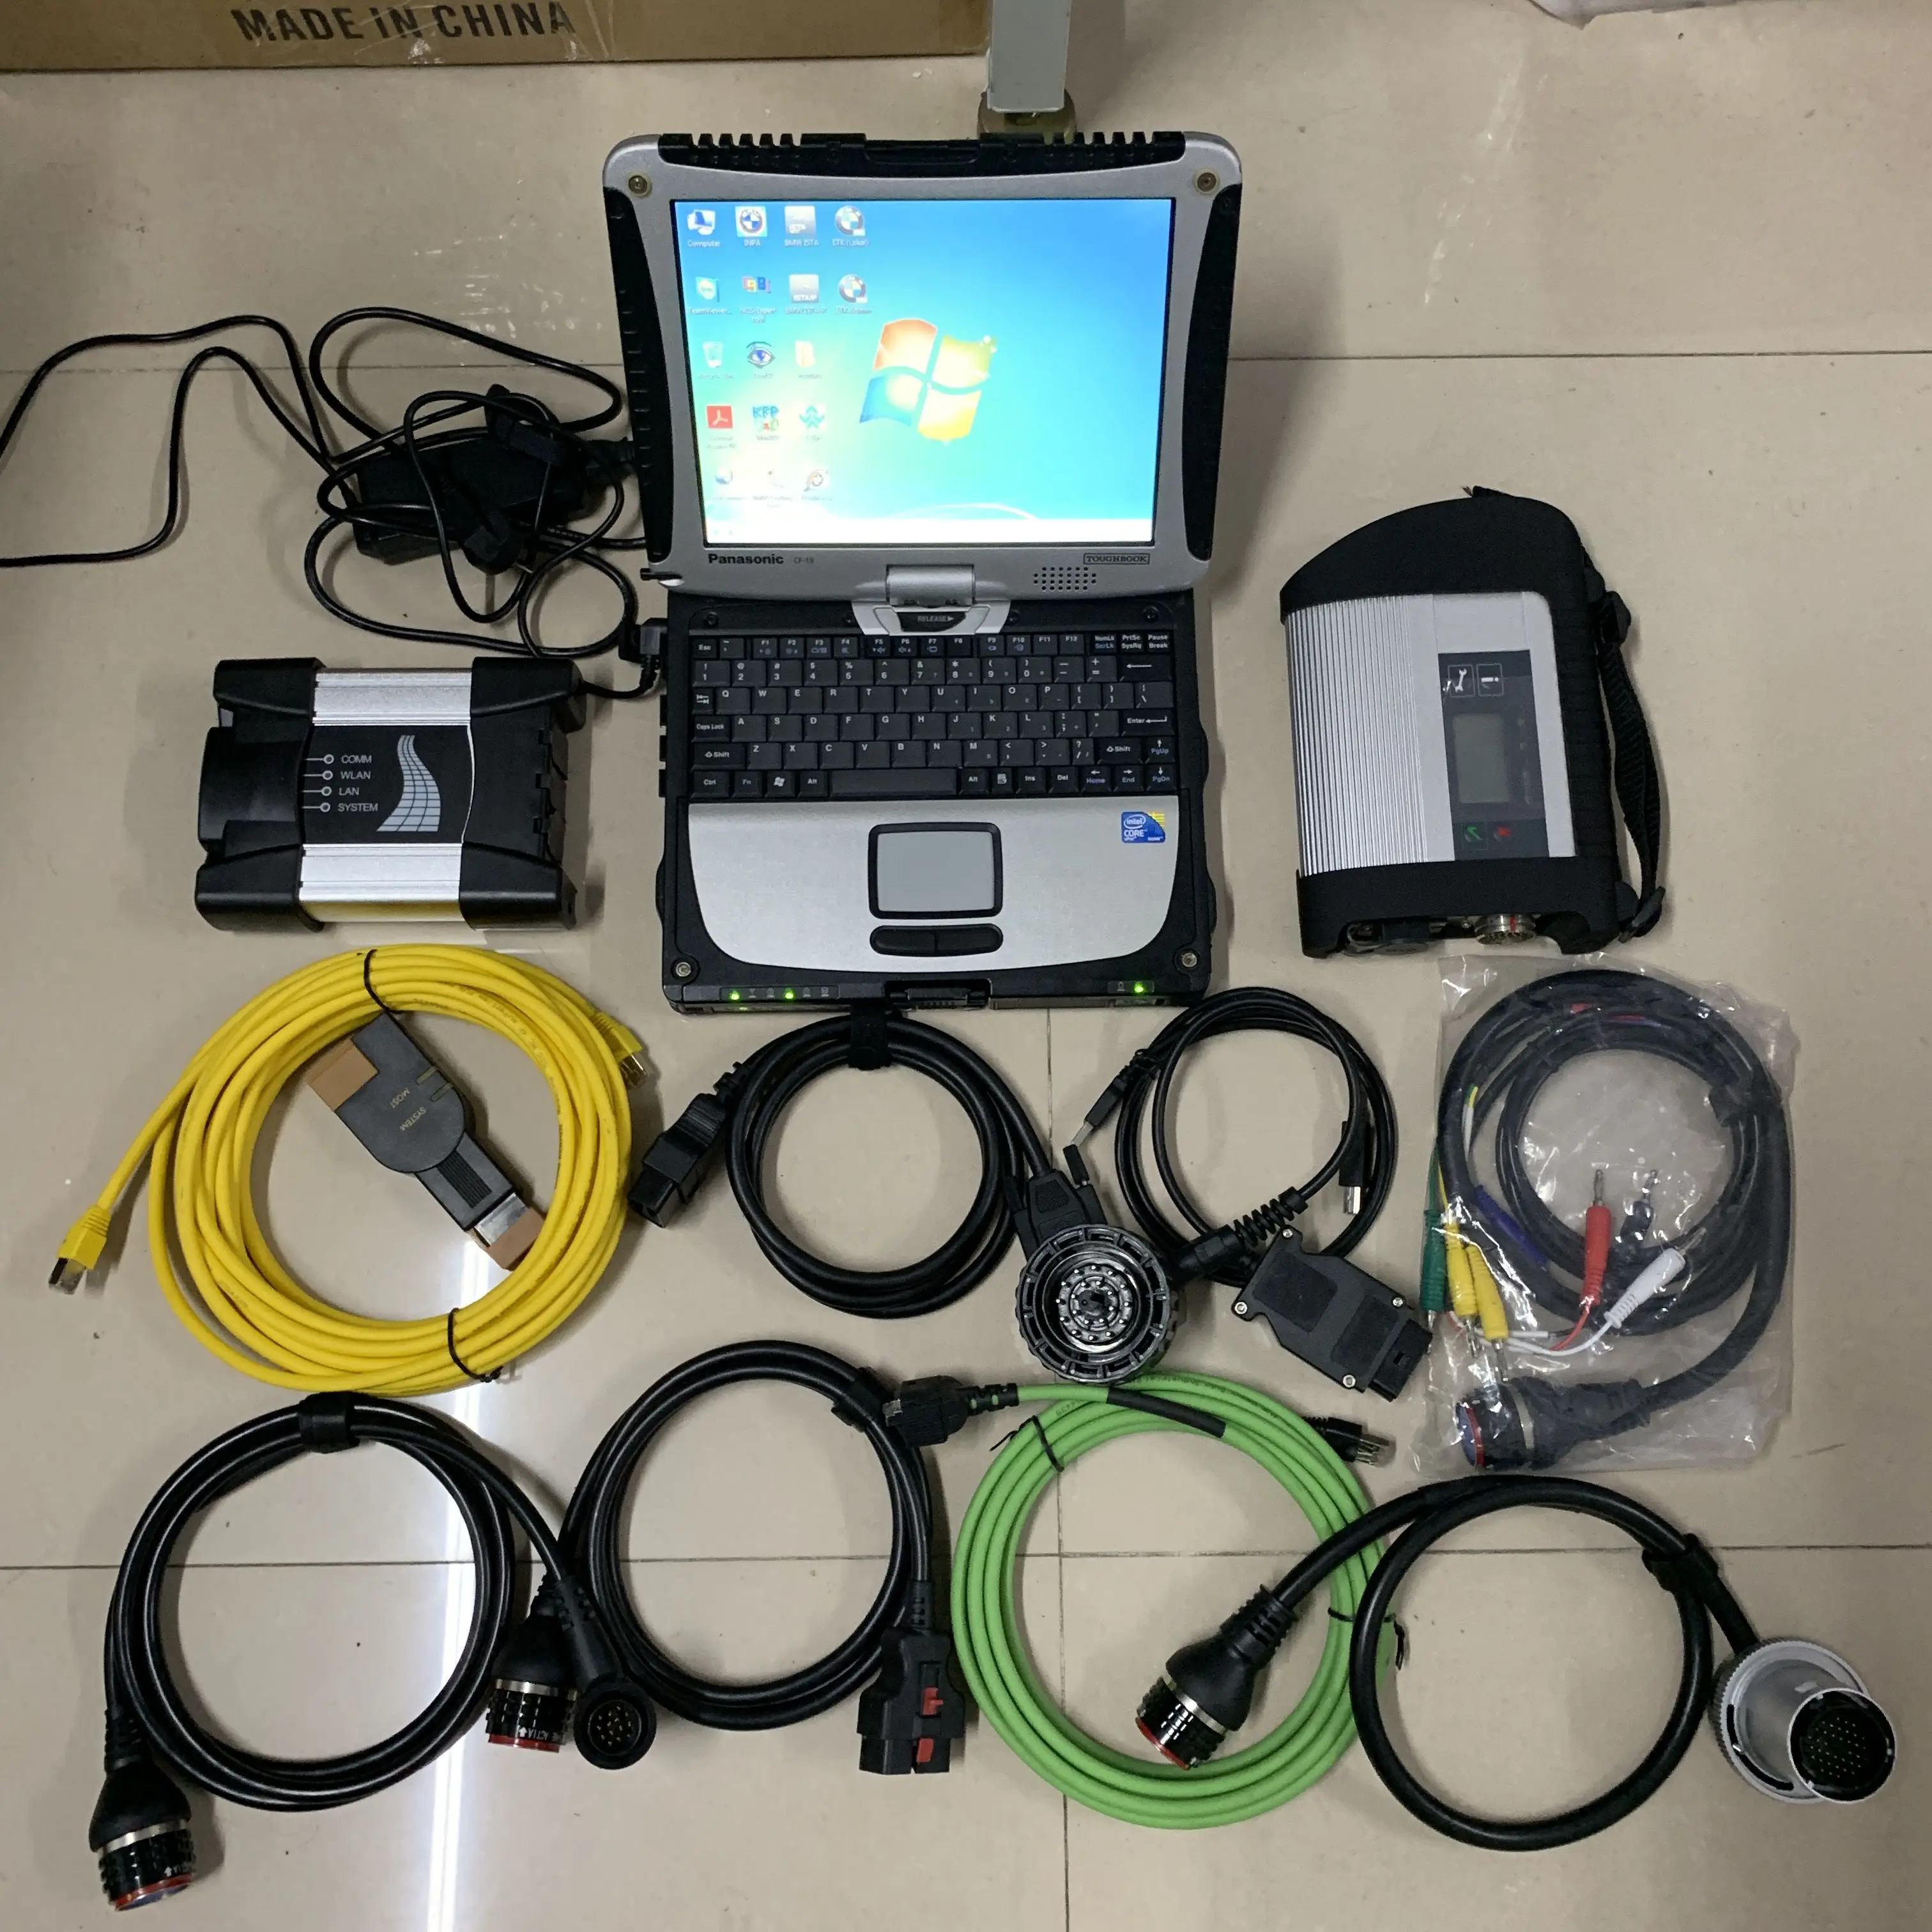 

MB STAR C4 Icom Next for BMW 2in1 Latest software 1TB HDD/SSD Used laptop Second Hand CF19 Auto Diagnosis Tool Car Code Scanner